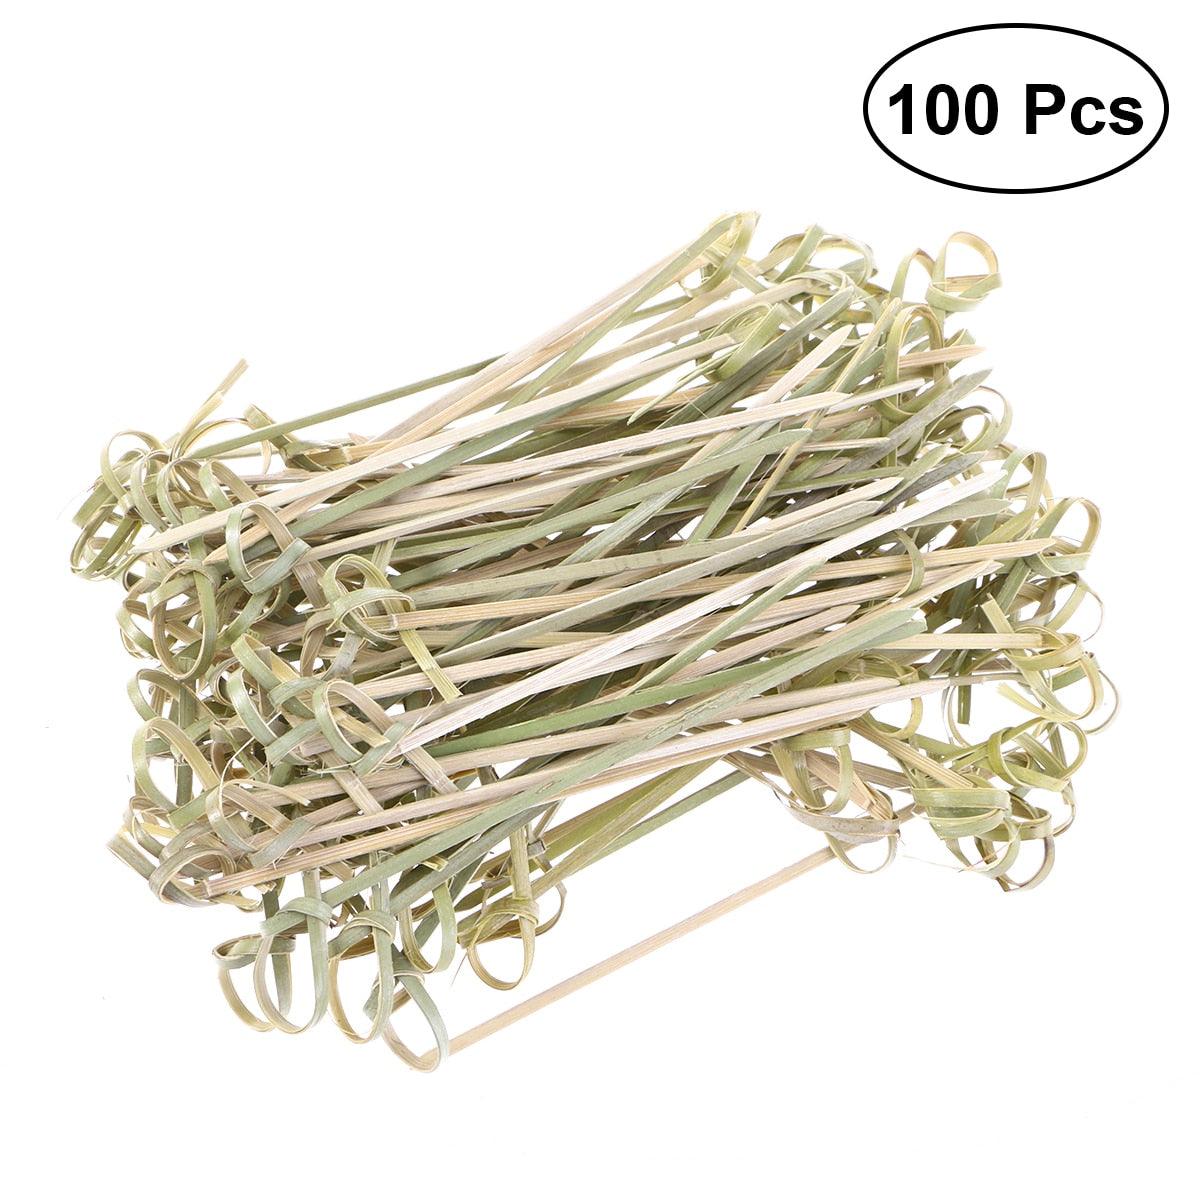 100pcs Disposable Bamboo Knot Skewers Cocktail Picks with Twisted Ends for Cocktail Party Barbeque Snacks Club Sandwiches - Earth Thanks - 100pcs Disposable Bamboo Knot Skewers Cocktail Picks with Twisted Ends for Cocktail Party Barbeque Snacks Club Sandwiches - natural, vegan, eco-friendly, organic, sustainable, bamboo, biodegradable, natural, non-toxic, plastic-free, vegan